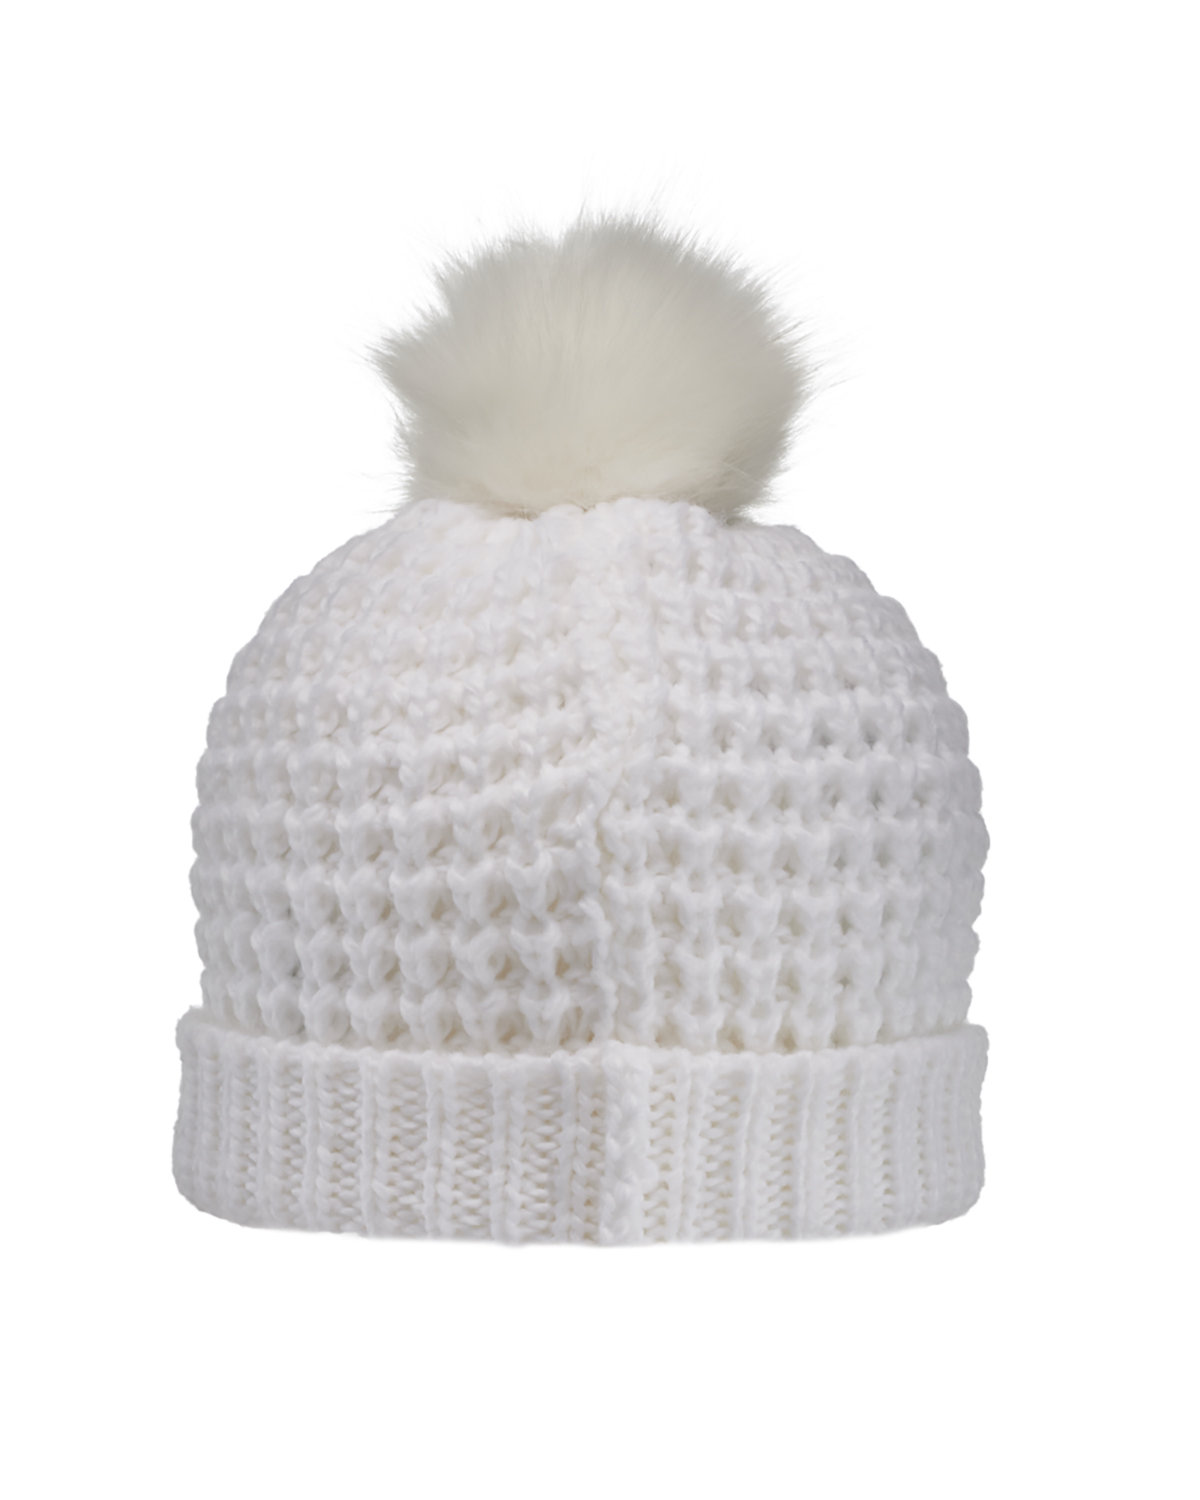 J. America 5005 - Adult Slouch Bunny Knit Cap